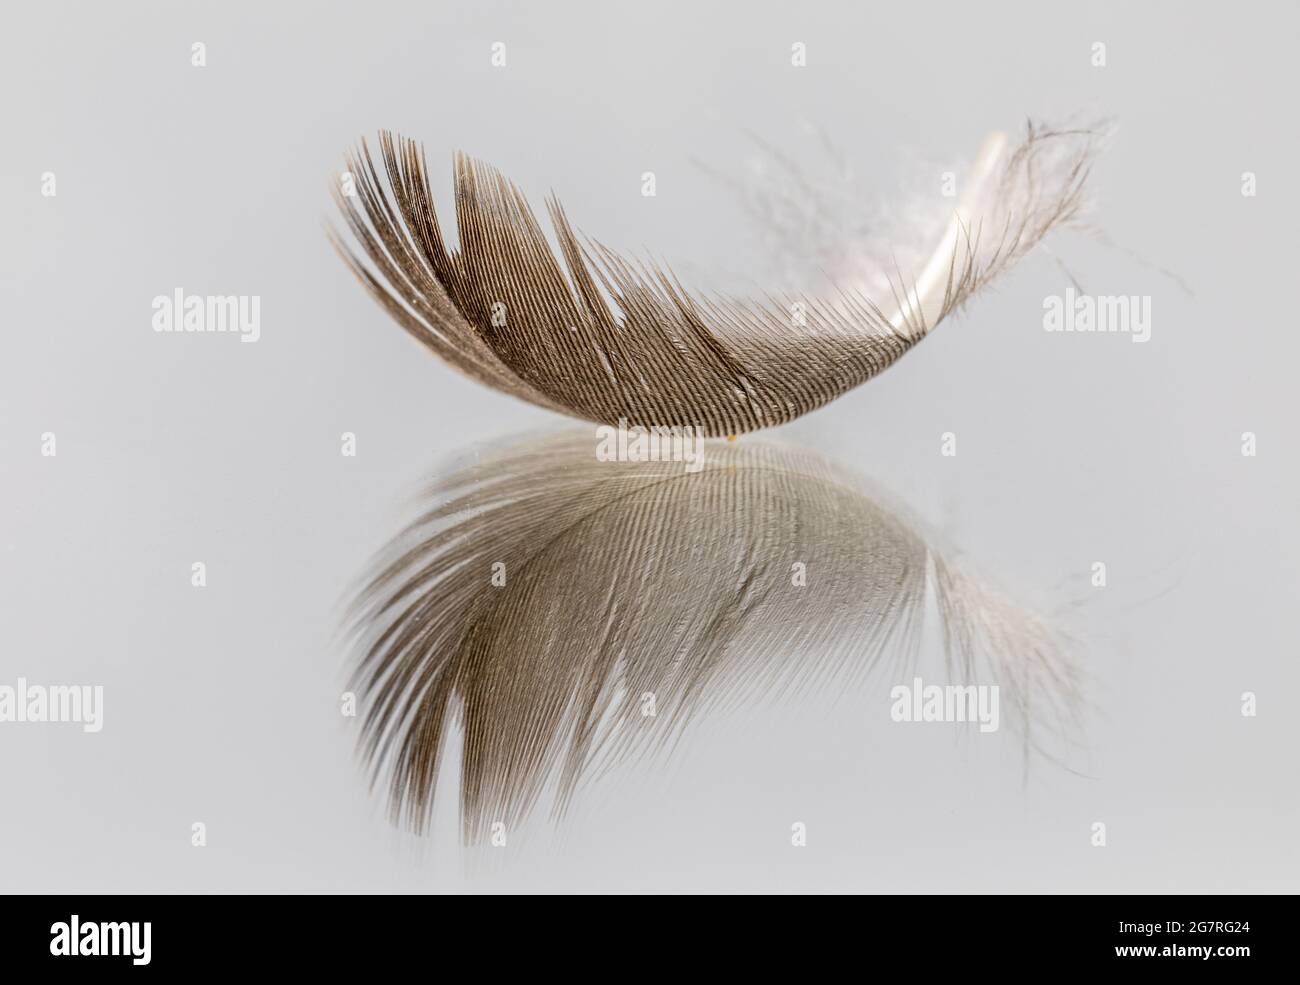 A single brown bird feather with a reflection.  Isolated on a white background Stock Photo